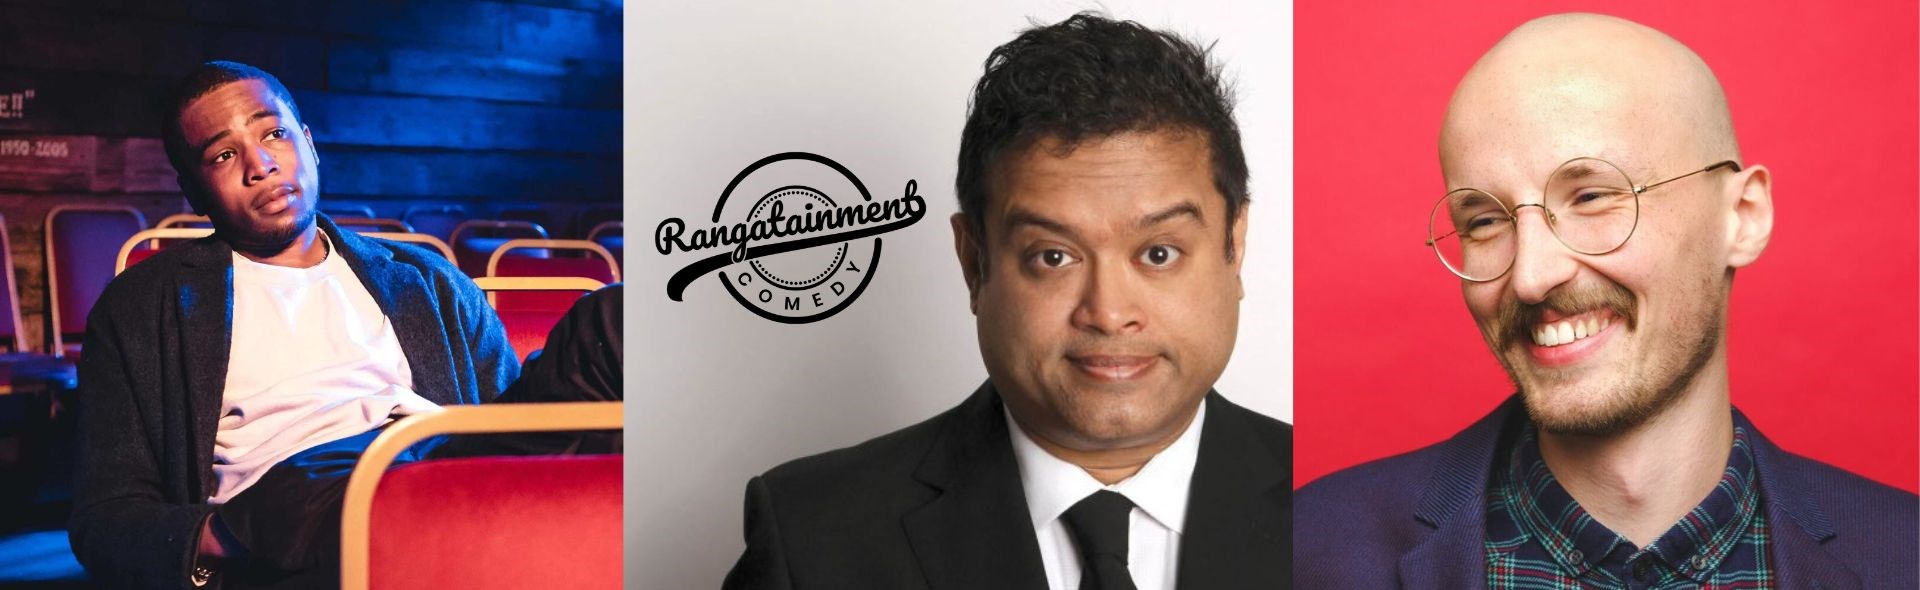 Rangatainment Comedy Presents: Comedy at The Capitol